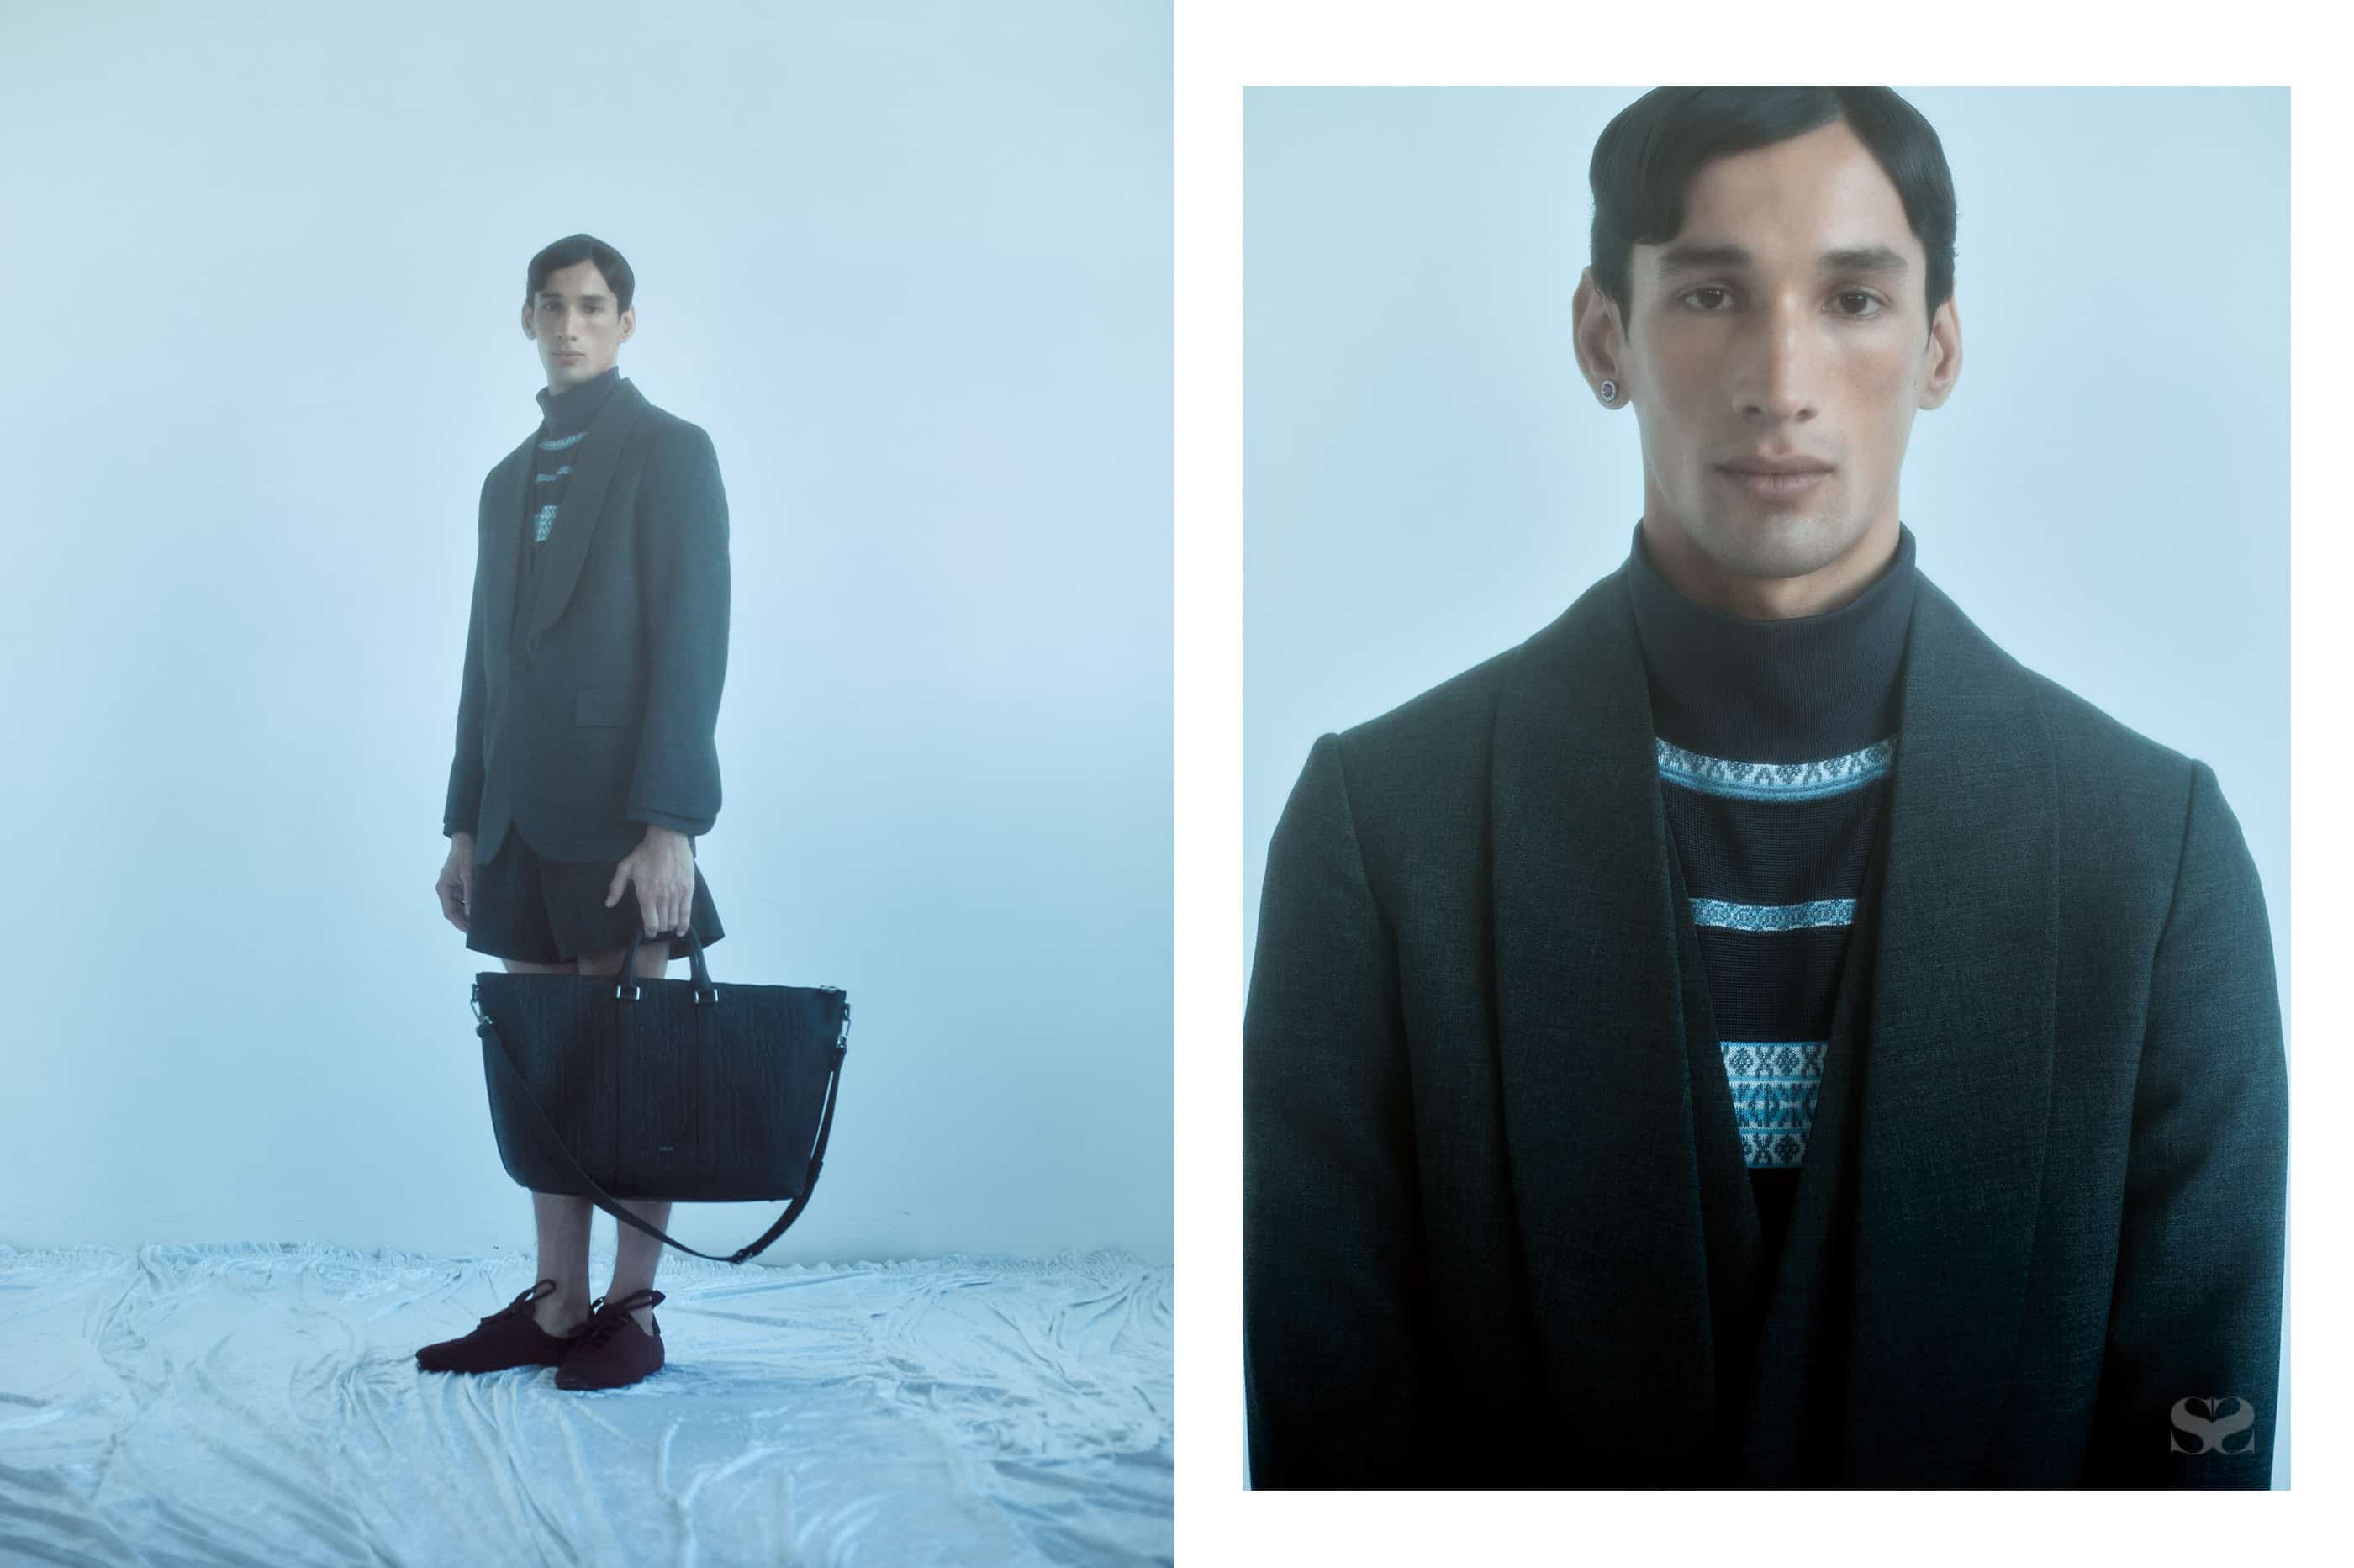 Dior Men give a lesson in outwear dressing for our 'Ideas' issue